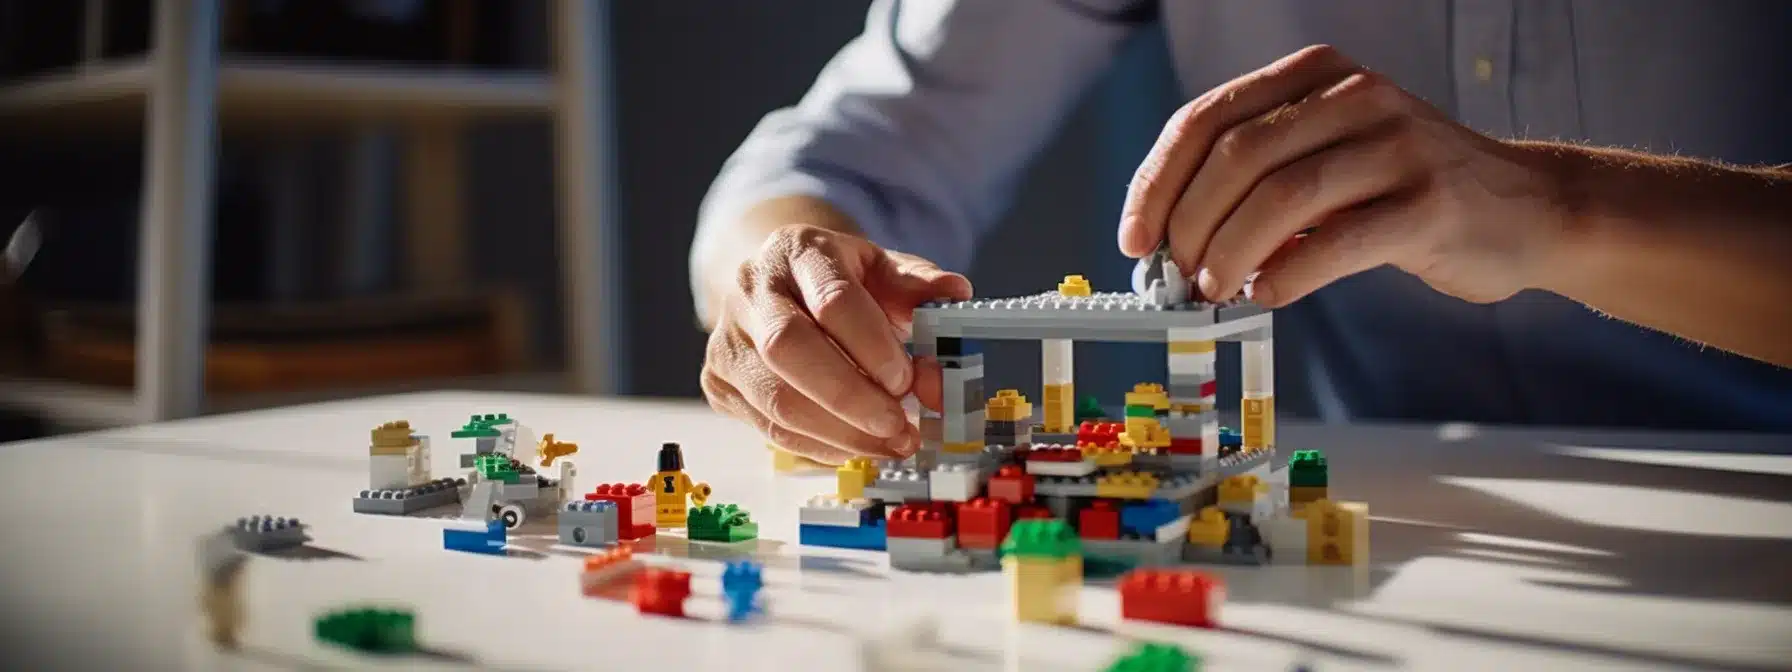 A Person Carefully Constructing A Lego Structure With Focused Determination.